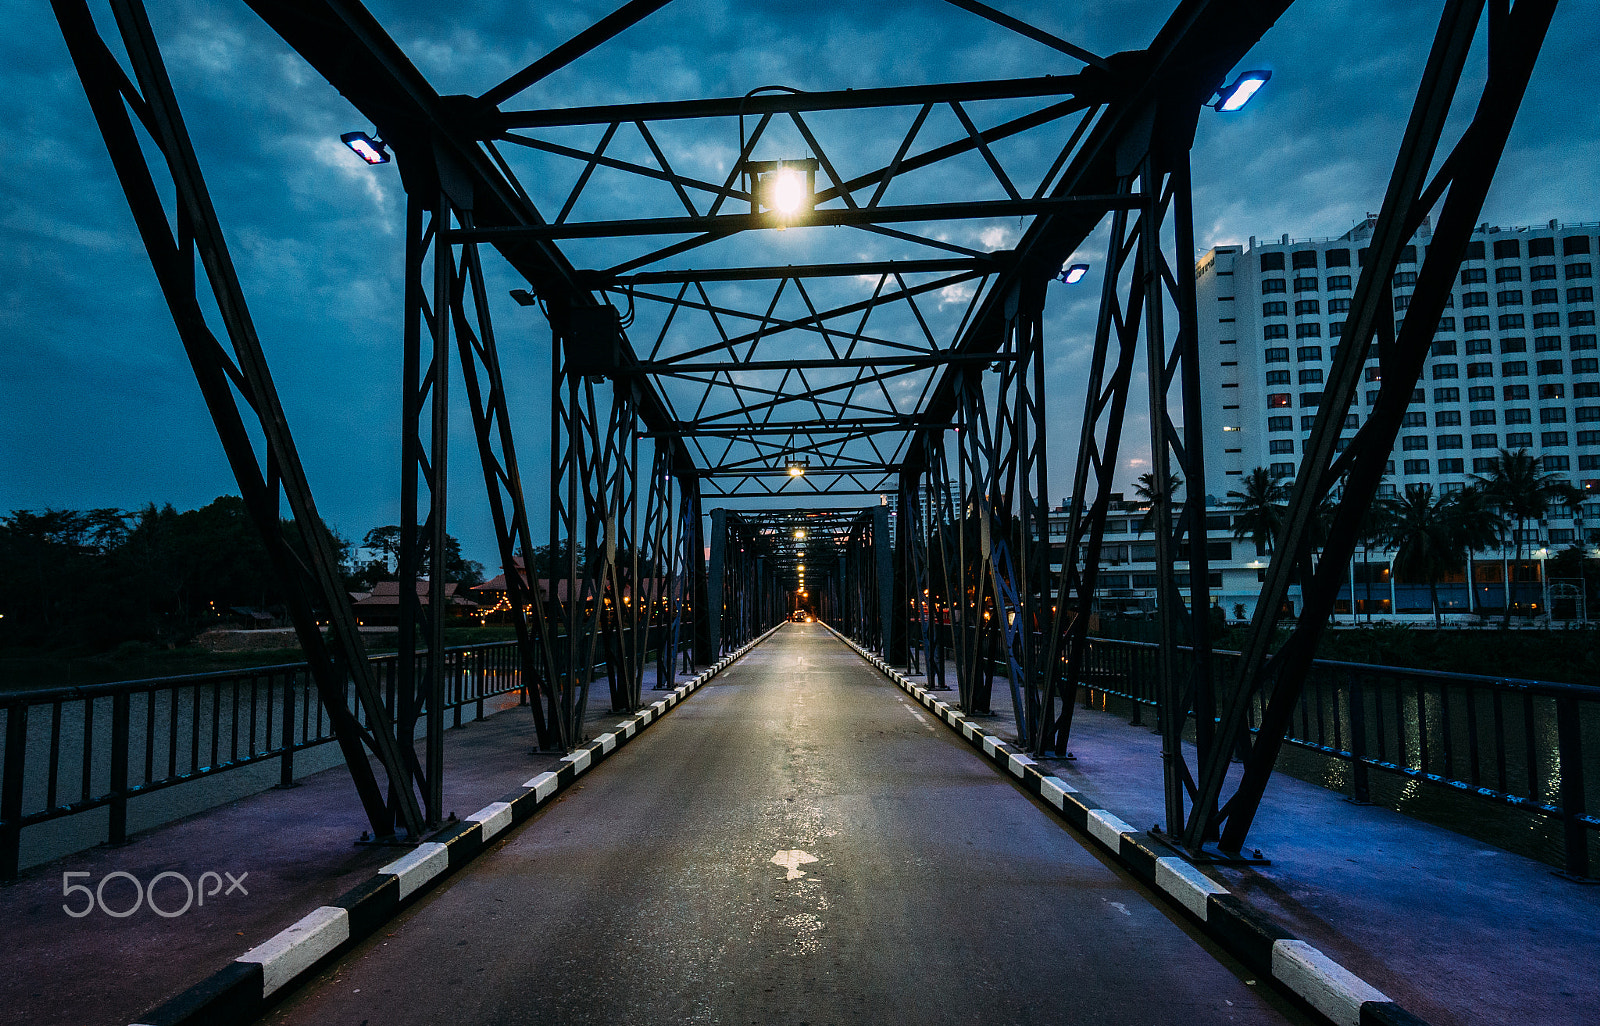 Sony a6300 sample photo. Magnificent iron bridge of chiang mai, thailand photography